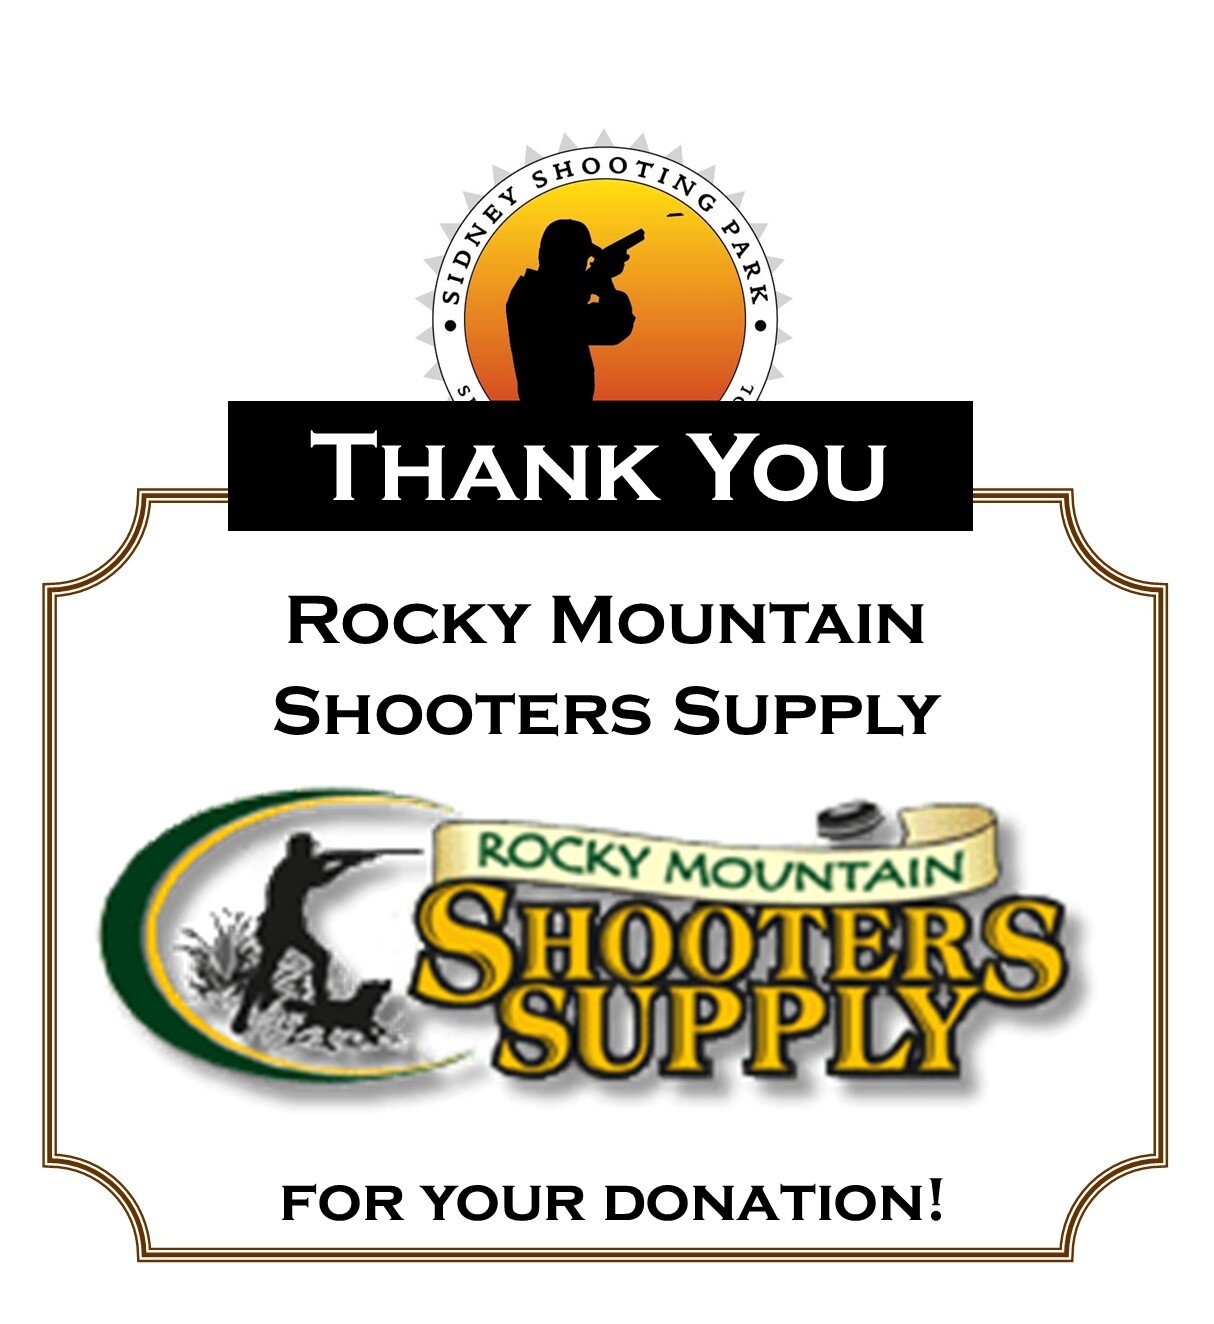 Thank_You_Rocky_Mtn_Shooters_Supply_Tim_Brough.jpg